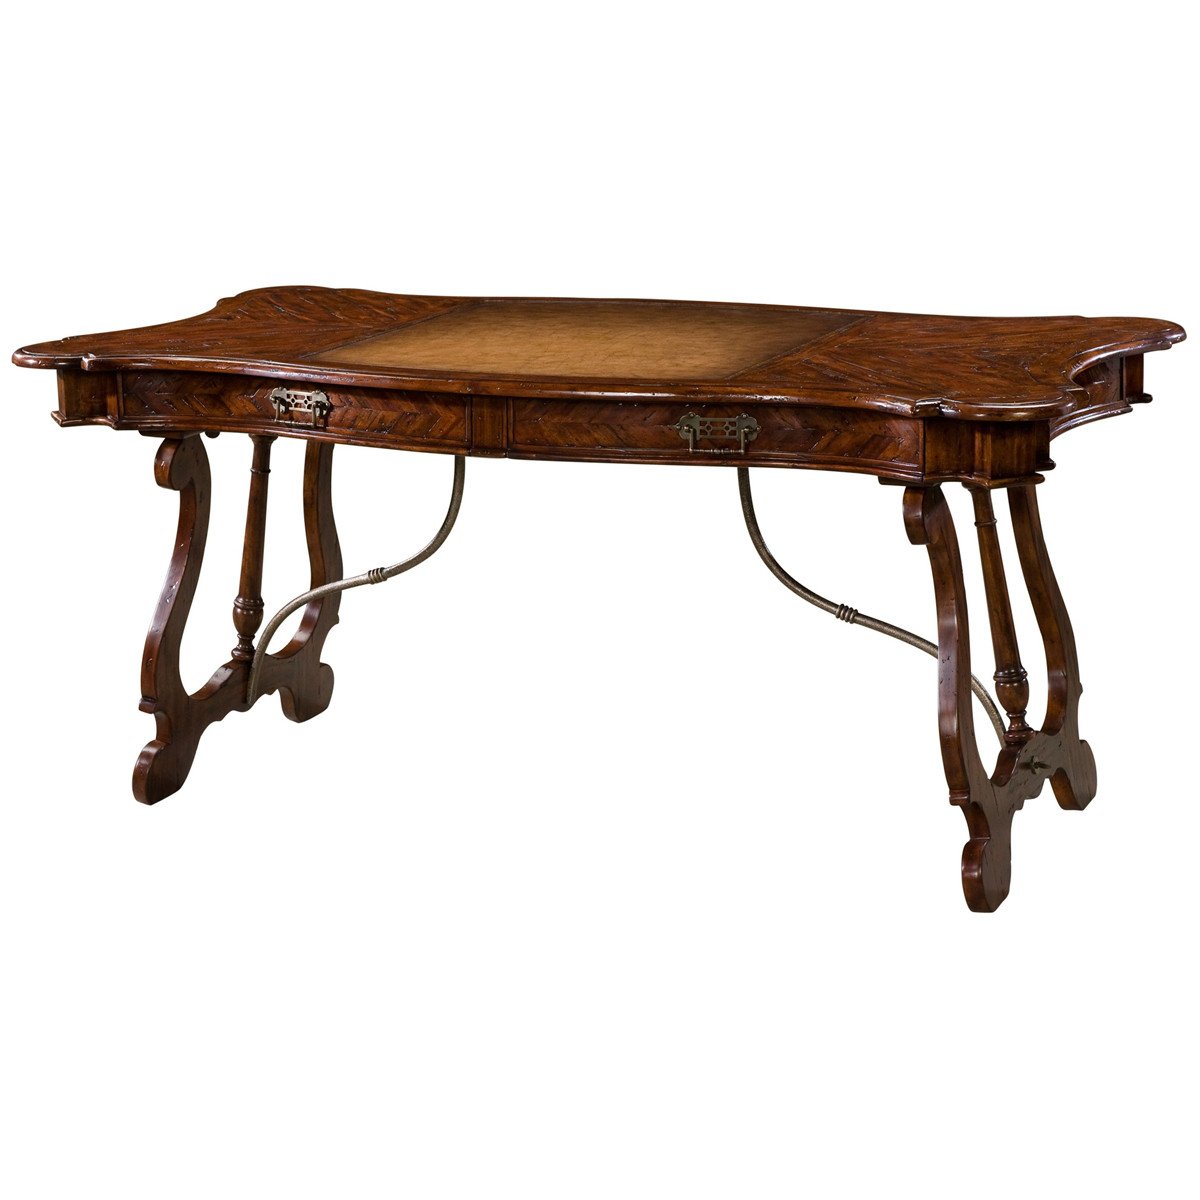 Theodore Alexander Castle Bromwich Bragana Writing Table